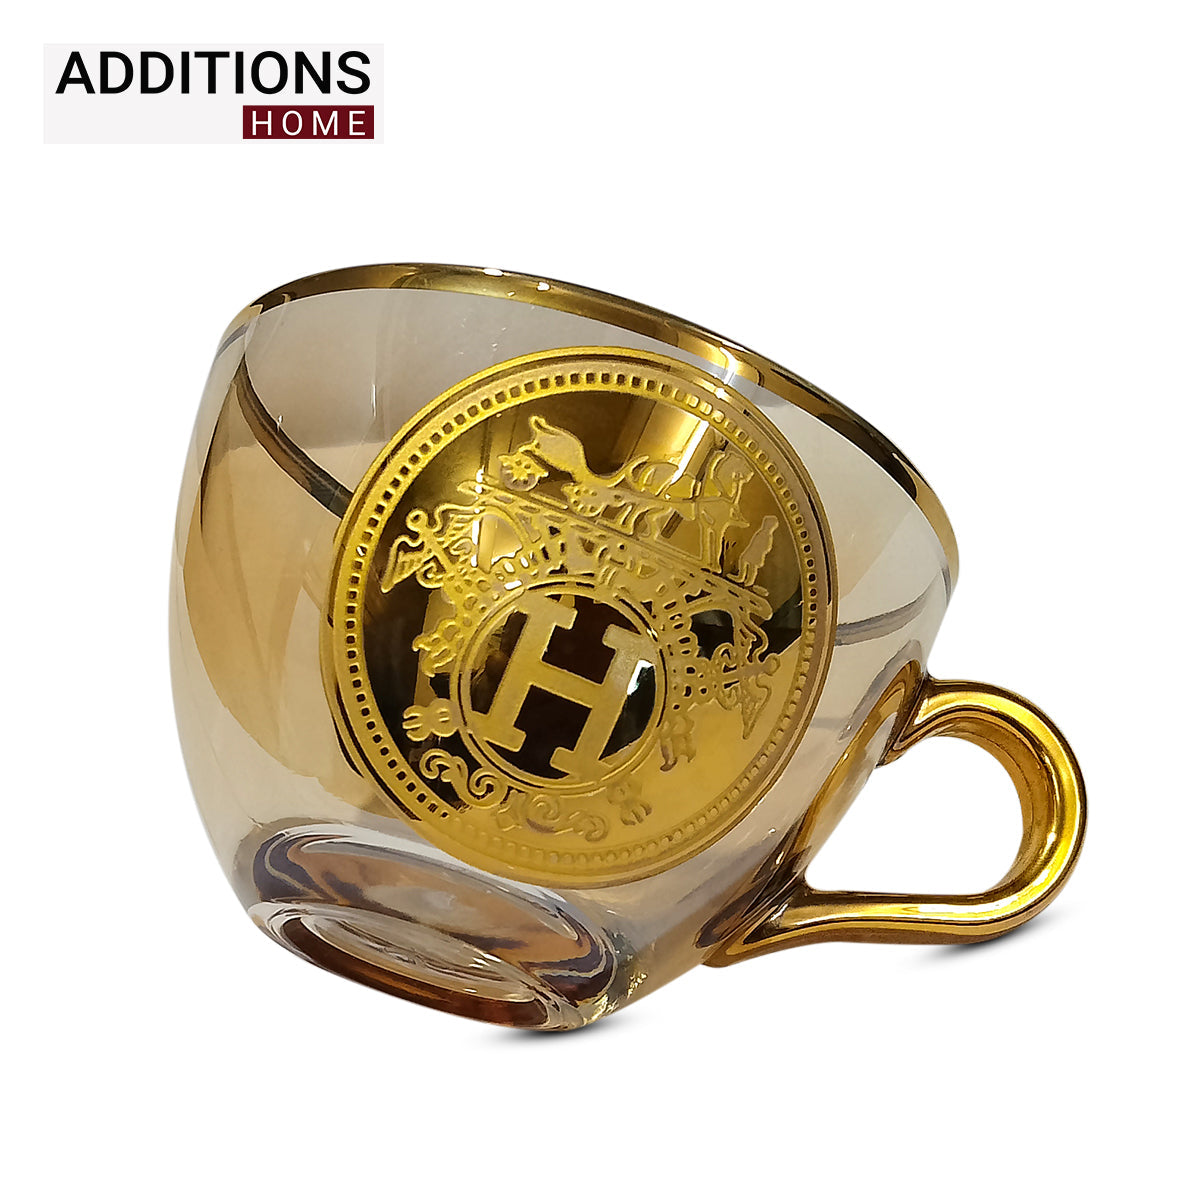 Elegant Cup and Plate MADE IN TURKEY, AMBER COLOUR, GOLD PLATED Set of 6 (limited edition)